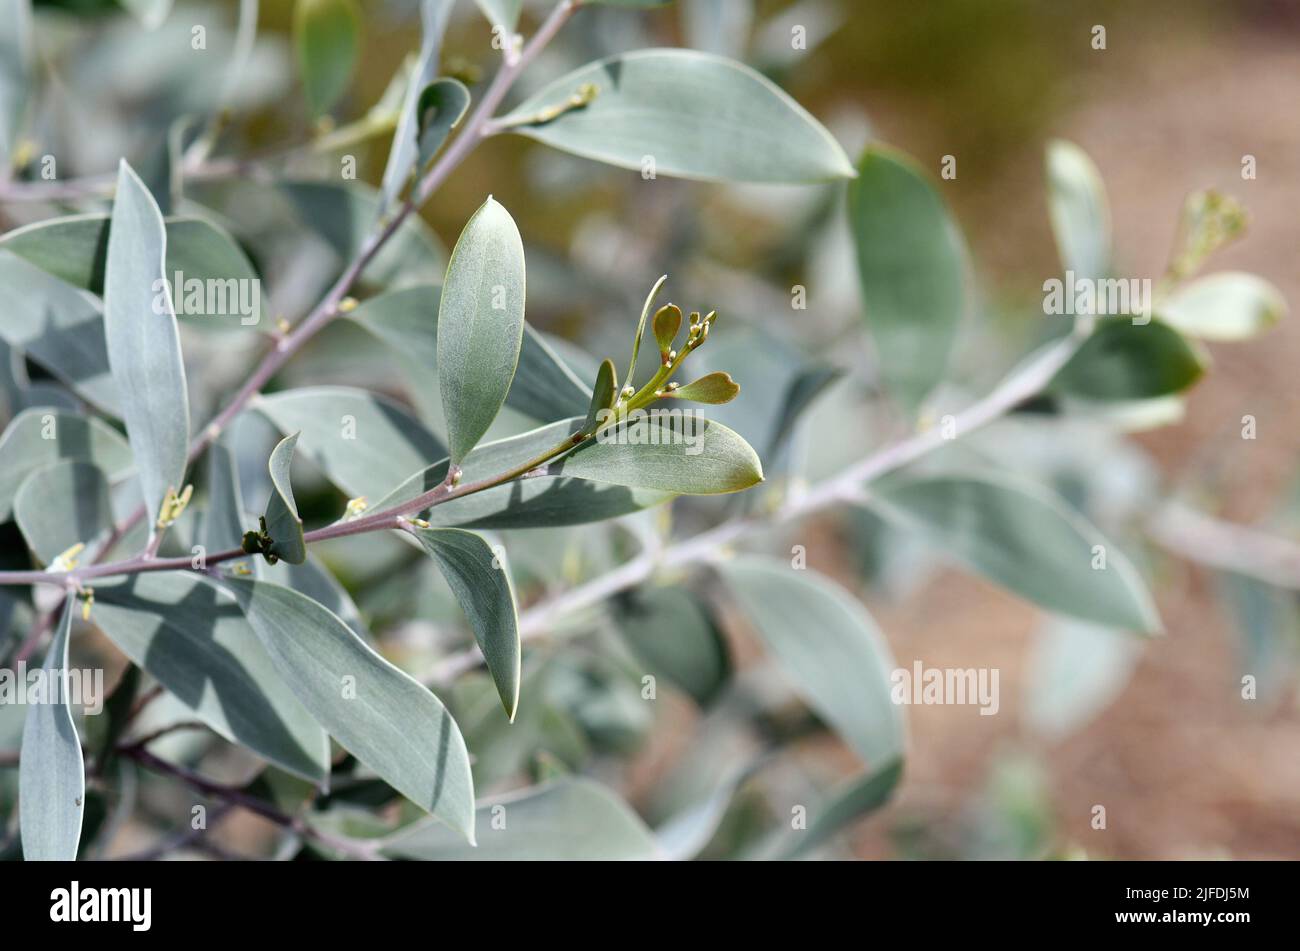 Silver and gold foliage of the Australian native Myall wattle Acacia binervia Sterling Silver cultivar, family Fabaceae. Mounding small tree Stock Photo